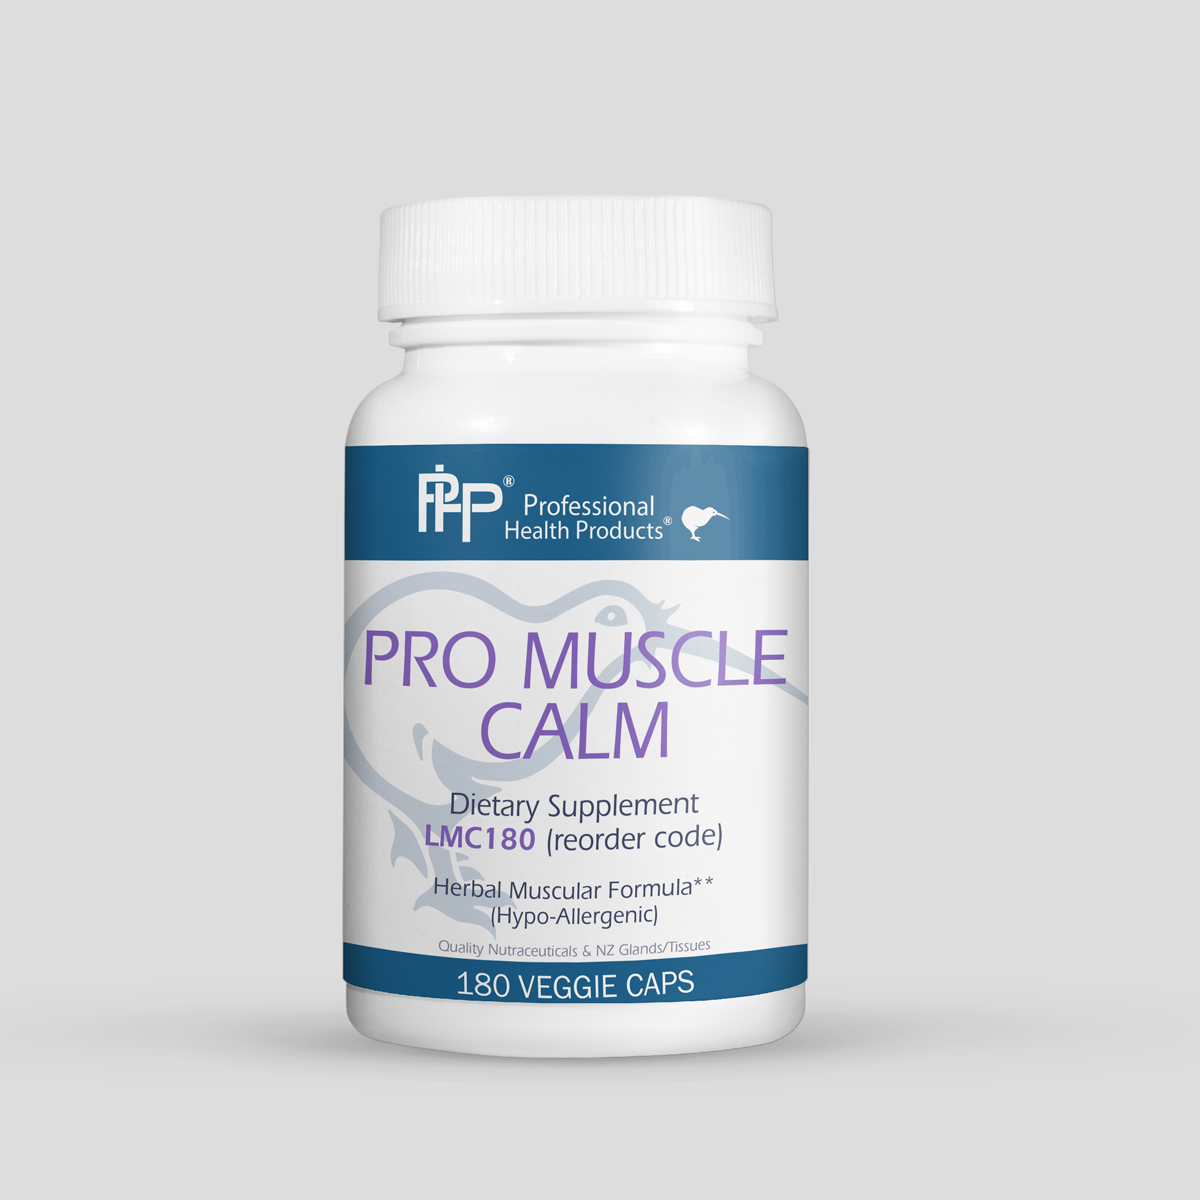 Pro Muscle Calm